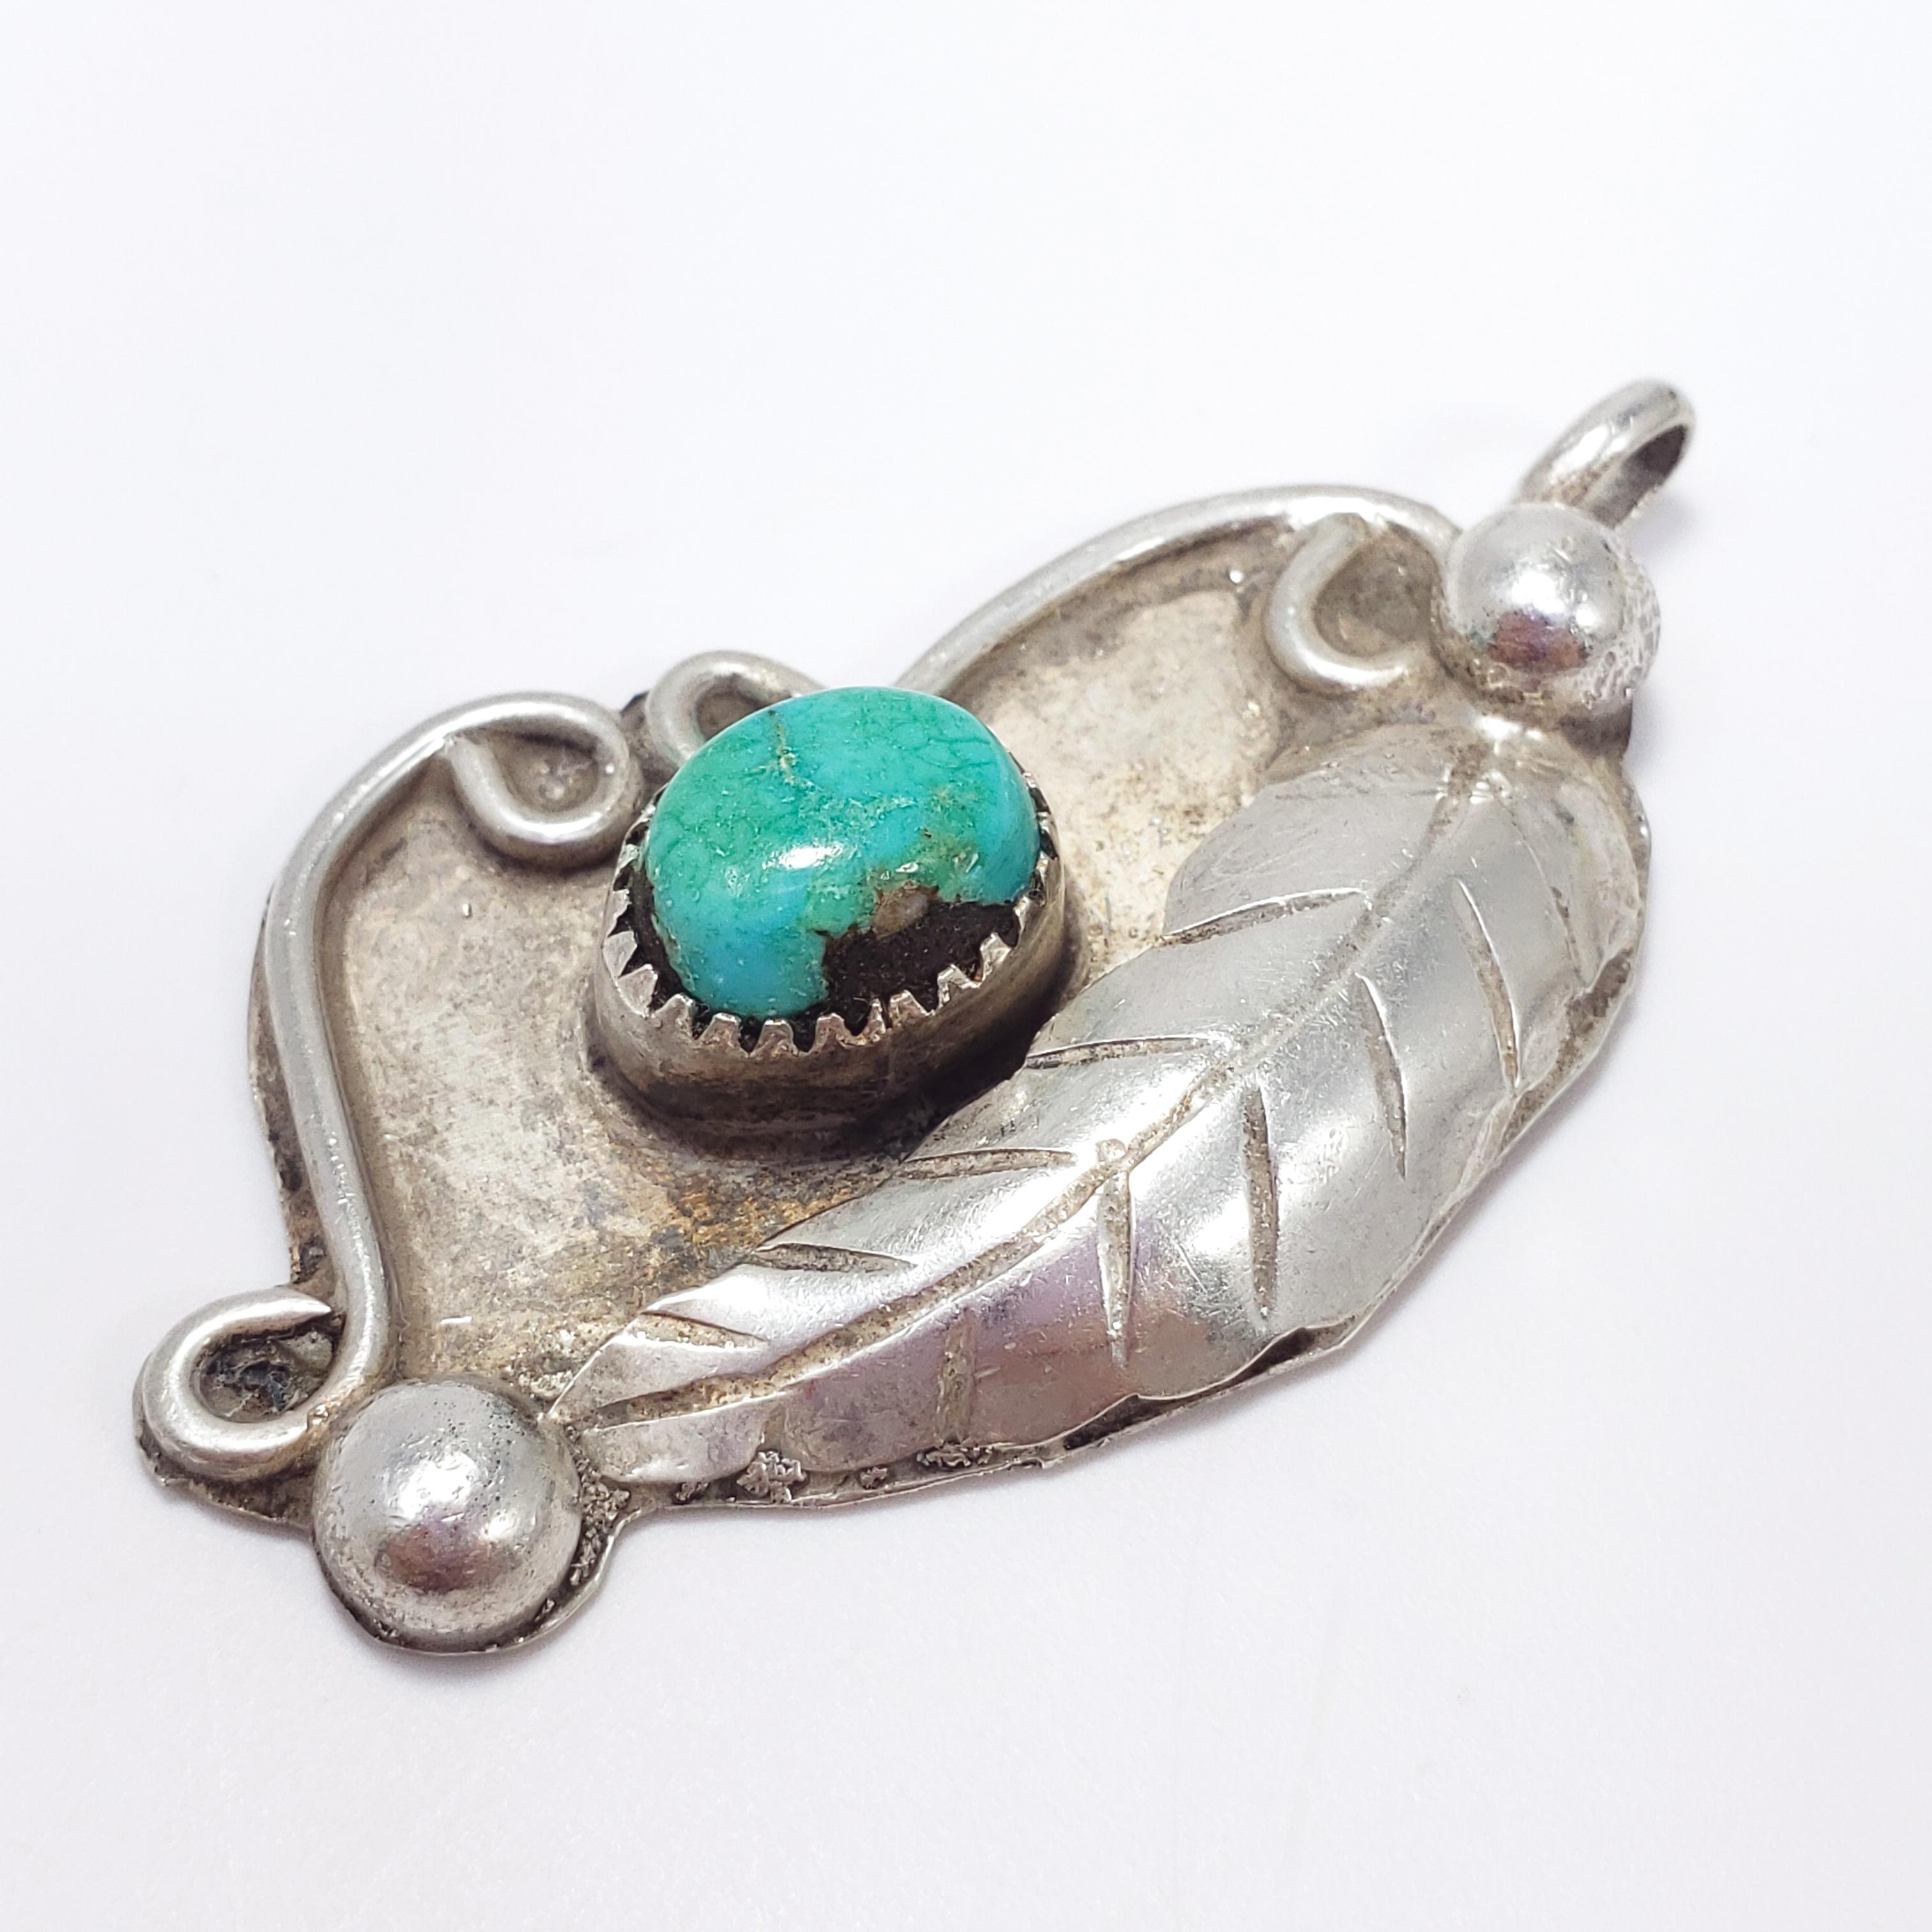 A handmade Navajo pendant featuring a decorative pendant, accented with a leaf motif and a genuine turquoise cabochon set in a sawtooth bezel. An authentic Native American accessory, circa mid 1900s.

Dimensions: L 4.1 x W 2.5 cm
Weight: 9 g
